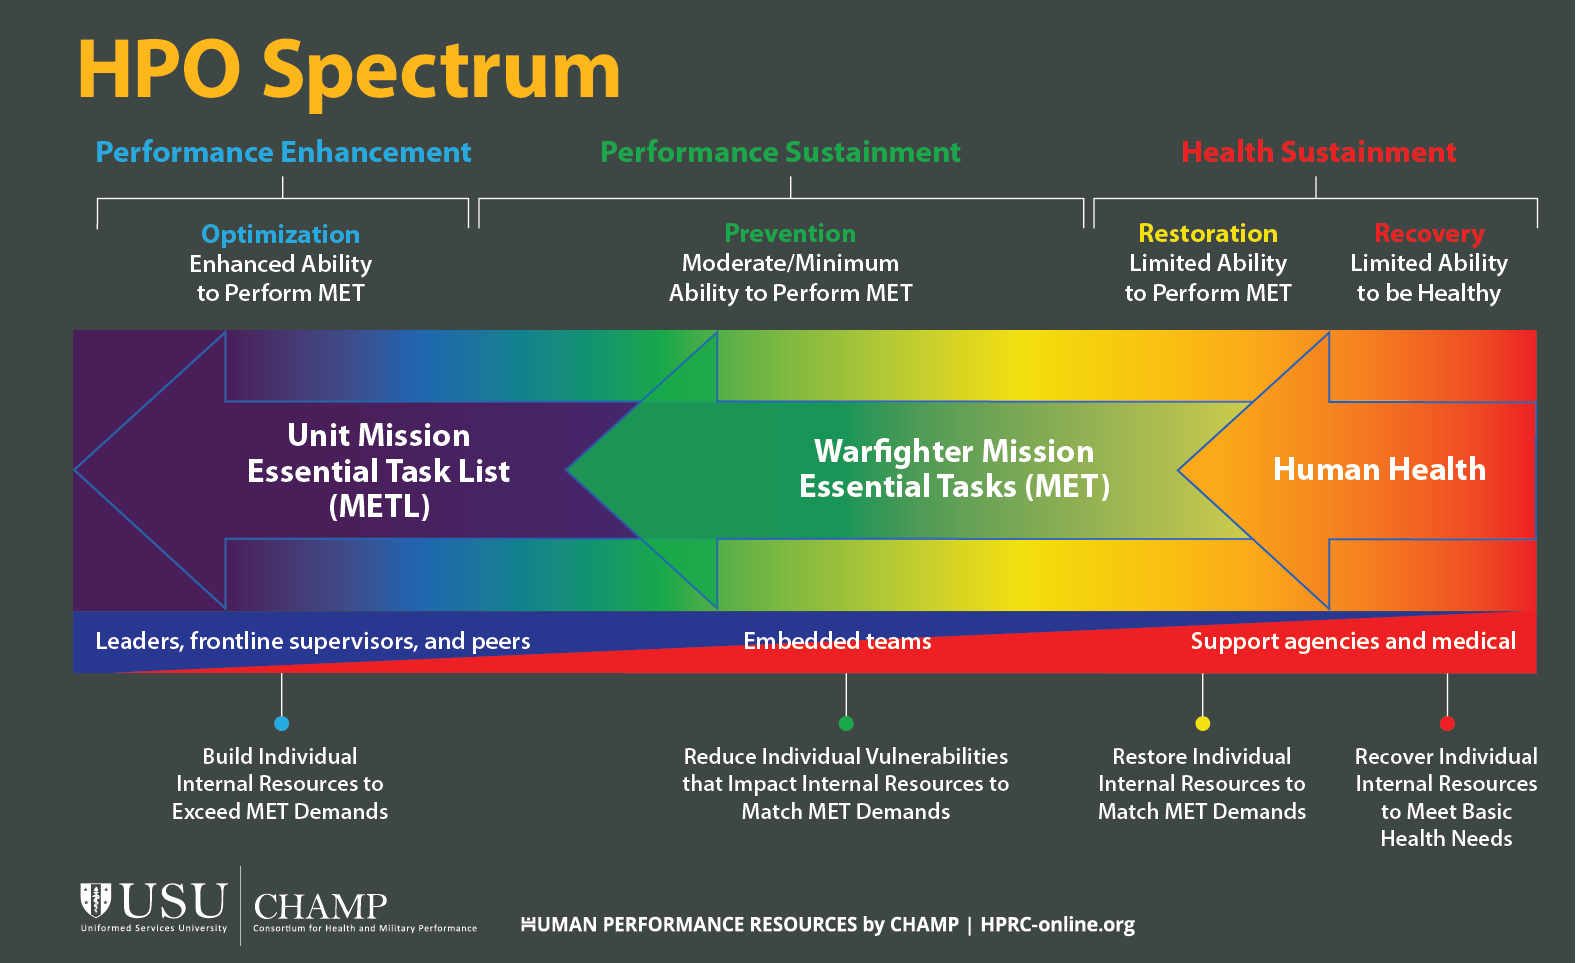 The HPO spectrum is a job-focused relationship between health and performance. Core tasks contribute to the successful execution of the unit’s mission essential task list. HPO accomplishes this by expanding and shifting the traditional spectrum of care to move beyond health and towards building mission-focused capabilities. Warfighters can perform specific actions to move left of bang towards optimal health and performance. Three phases represent a Military Service Member’s abilities to perform at their job and sustain their health: health sustainment, performance sustainment, and performance enhancement. The recovery and restoration stages are in the “health sustainment” phase because resources are being directed towards Warfighters’ abilities to maintain basic human health functions. During the recovery stage, Warfighters have a limited ability to be healthy, and they need to recover the available resources to meet basic health needs. During the restoration stage, Warfighters have a limited ability to perform core tasks. The goal is to restore available resources to match core task demands. The prevention stage is in the “performance sustainment phase,” and Warfighters have a moderate or minimum ability to perform core tasks. The goal is to reduce vulnerabilities that impact available resources to match core task demands. The optimization stage is in the “performance enhancement” phase. Warfighters have an enhanced ability to perform core tasks, build available resources to exceed core task demands, and help successfully execute the unit’s mission essential task list.